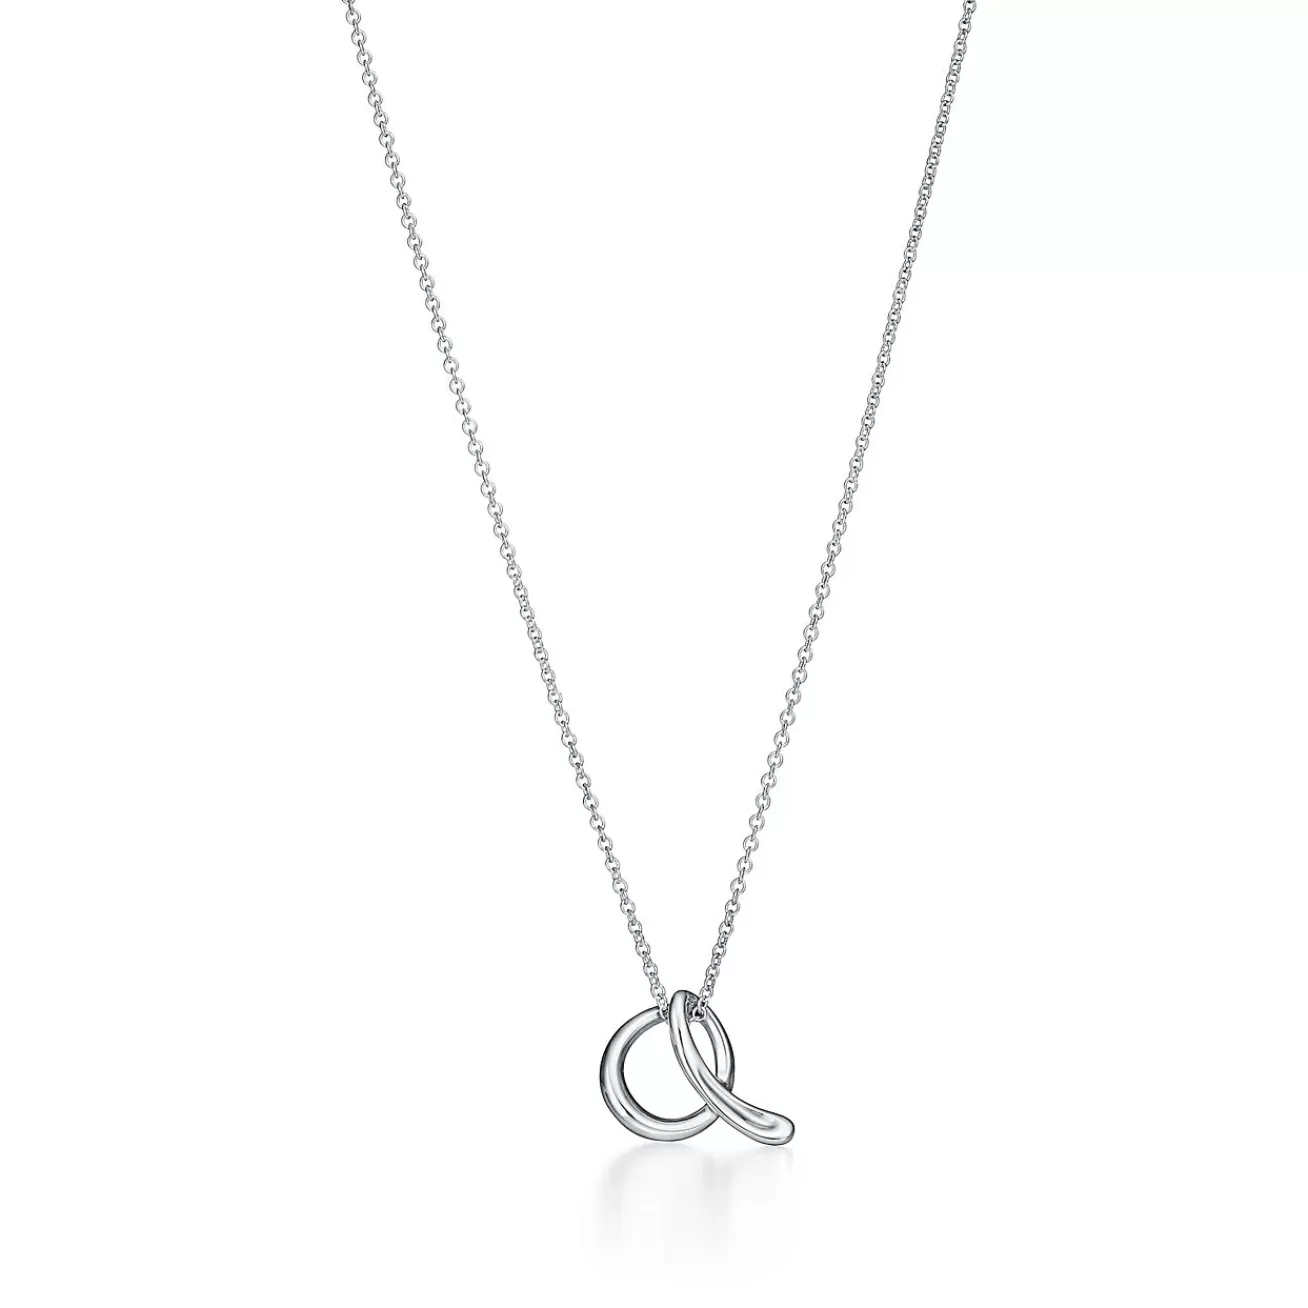 Tiffany & Co. Elsa Peretti® letter pendant. Sterling silver, small. Letters A-Z available. | ^ Necklaces & Pendants | Gifts for Her